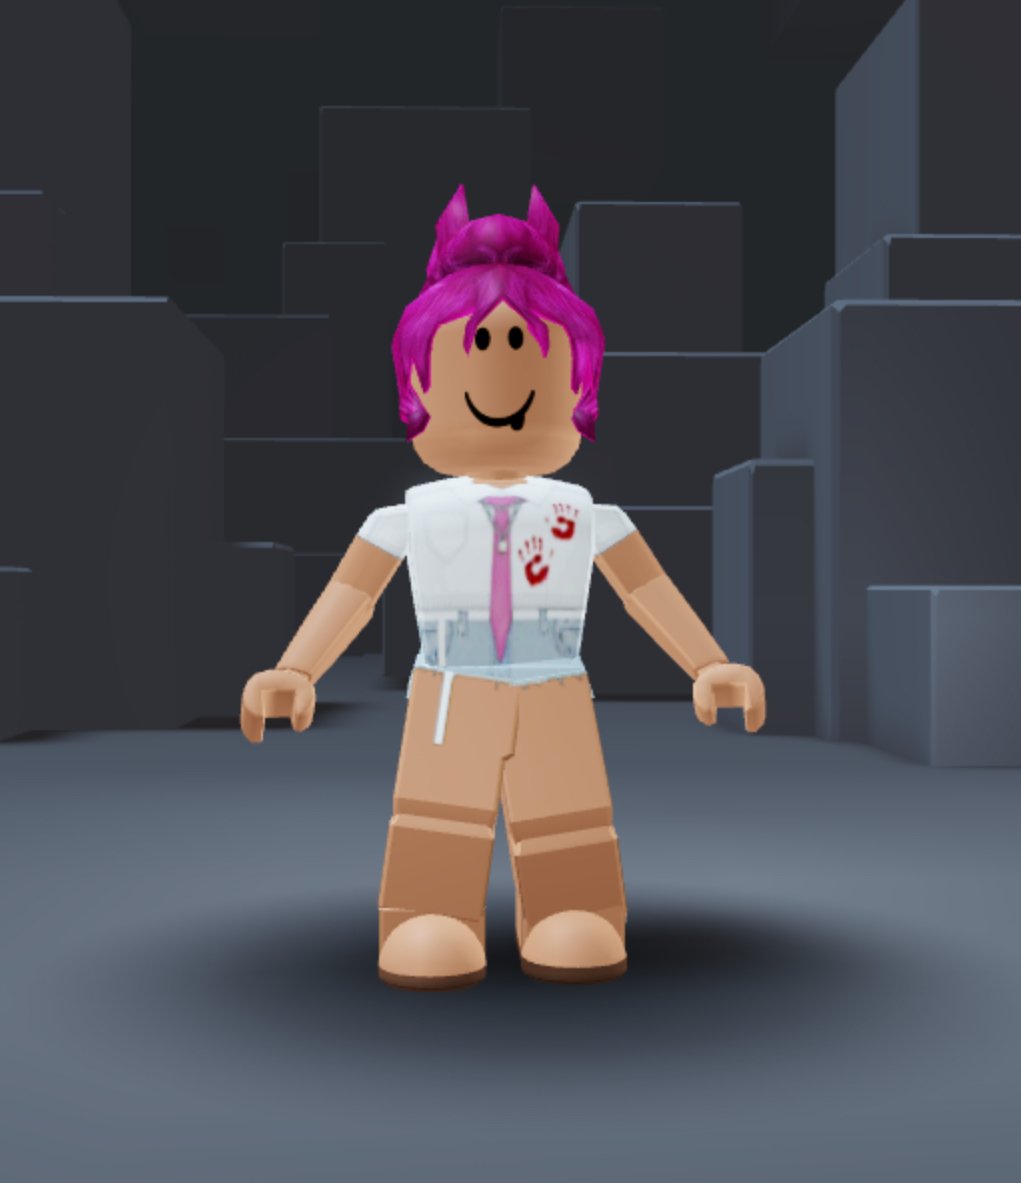 Www Robloxfits Com Roblox Fits - free cool outfits on roblox